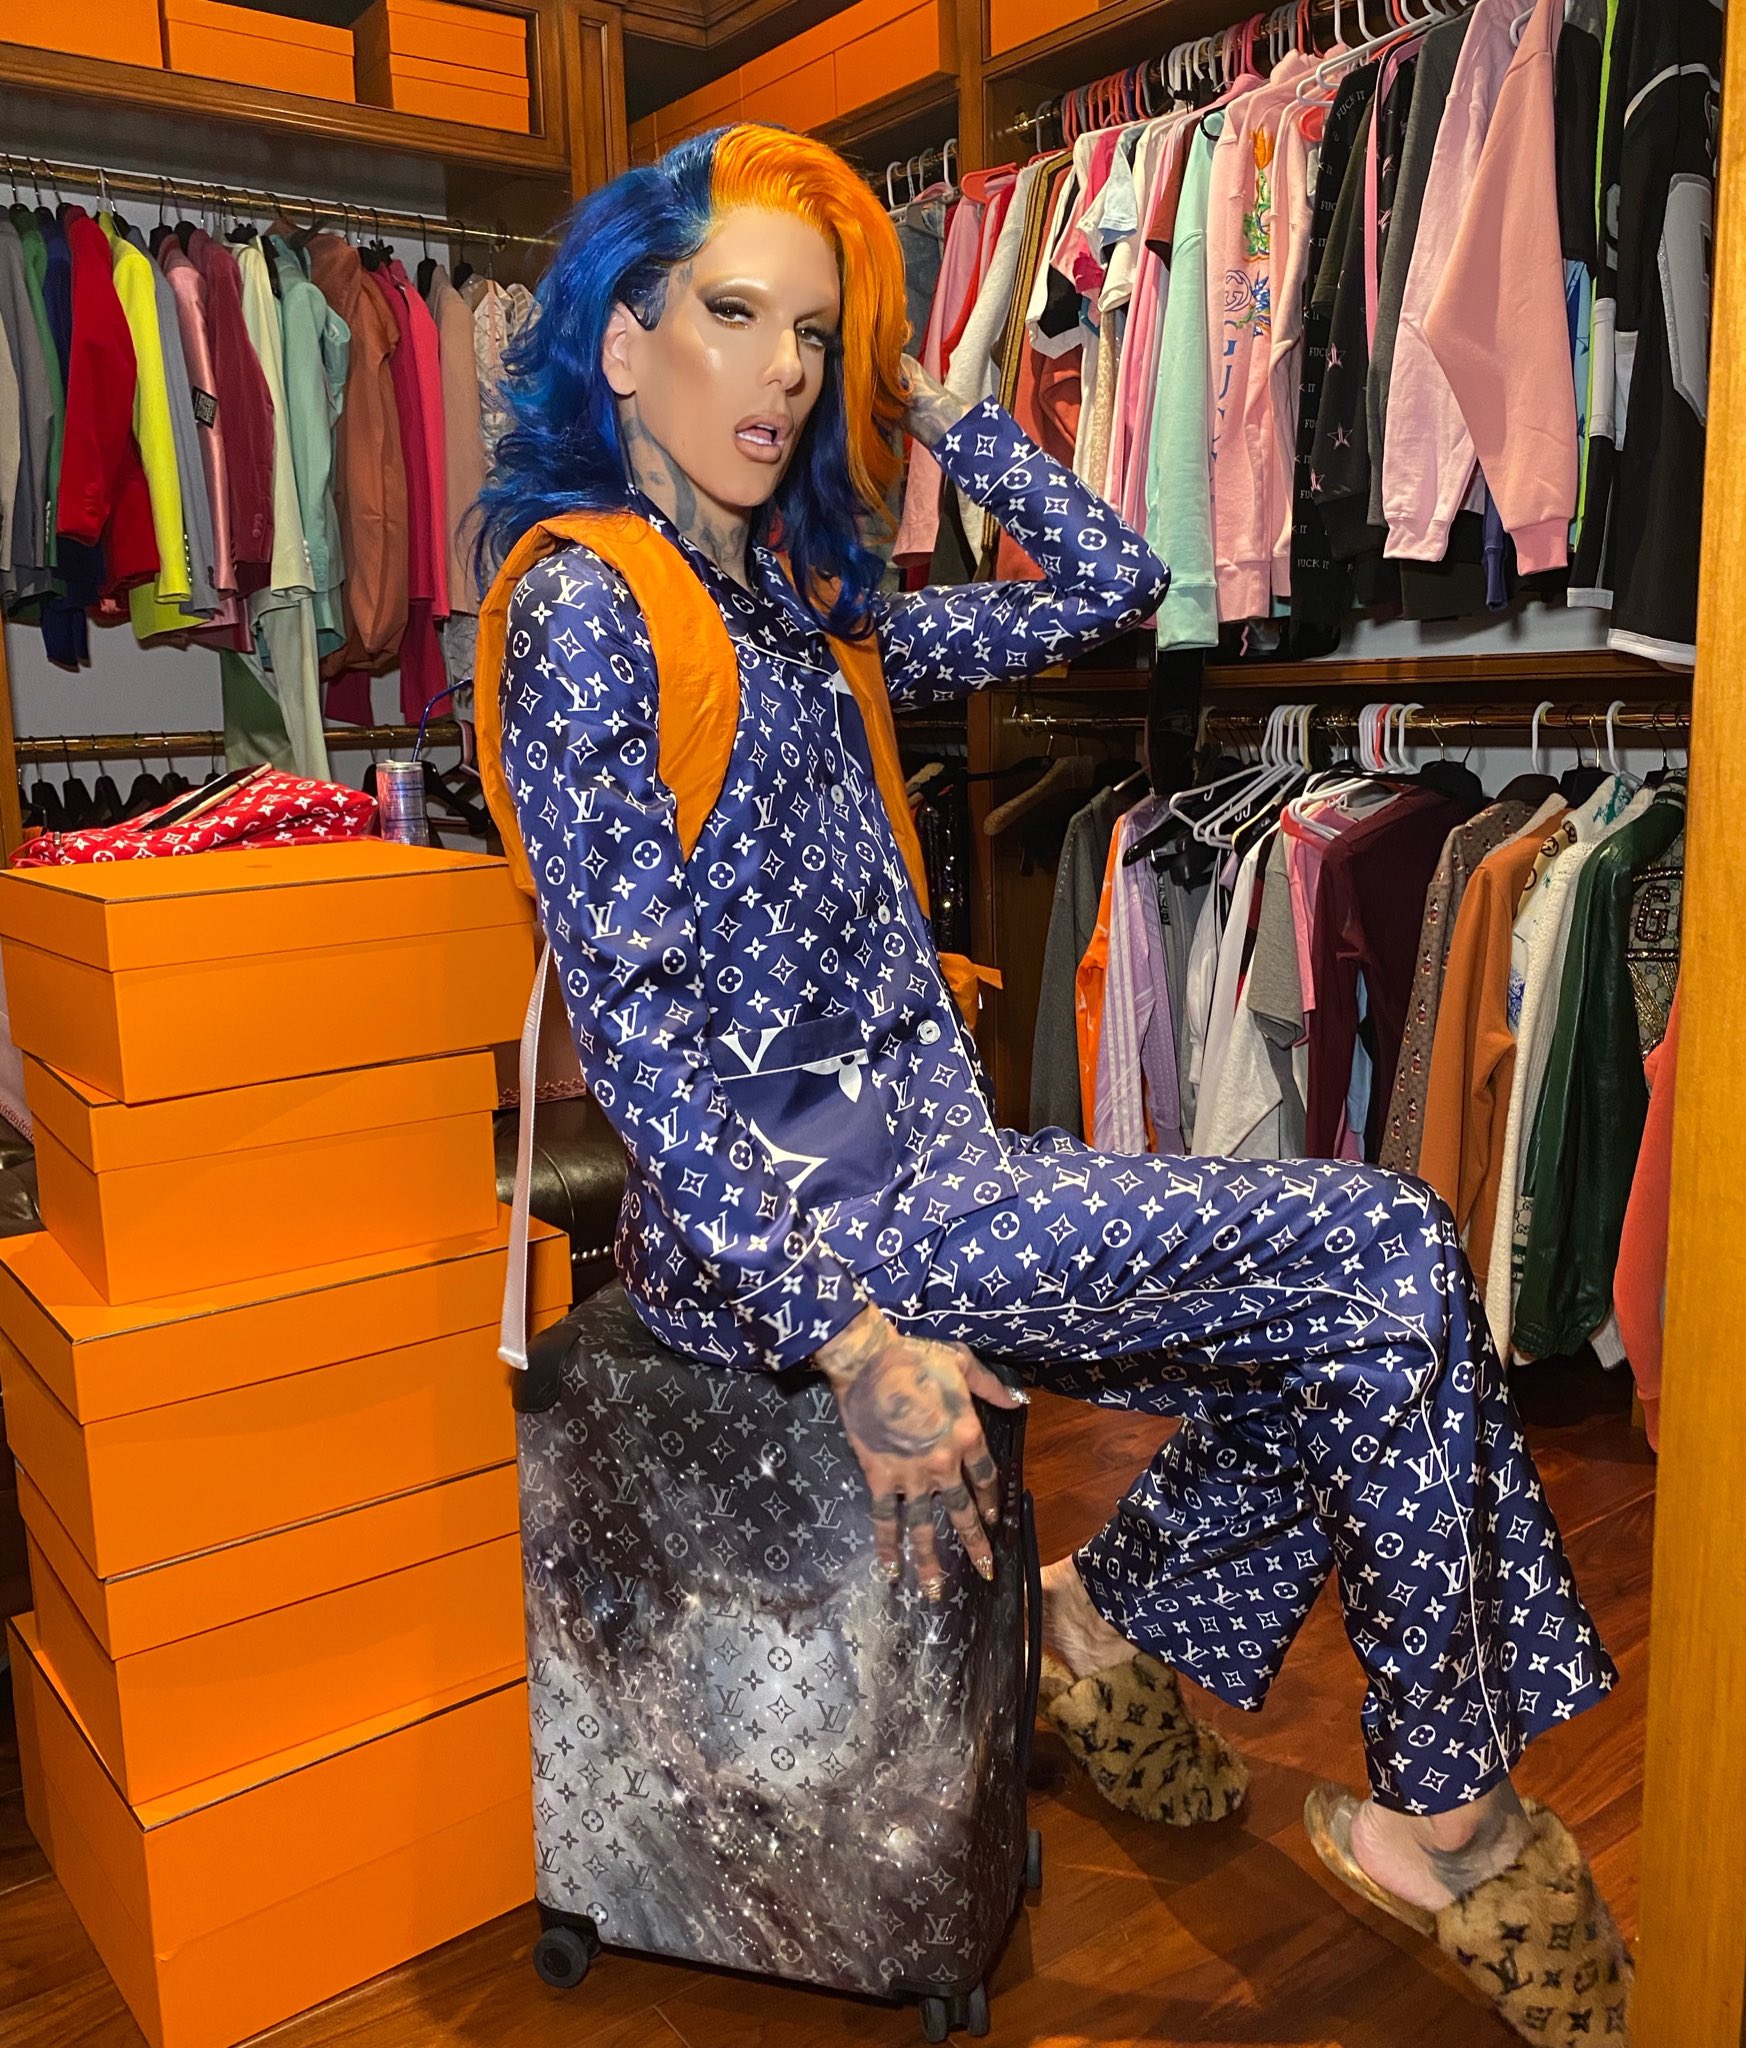 Jeffree Star on X: Packing up for my trip to Wyoming 💦🧡 Can